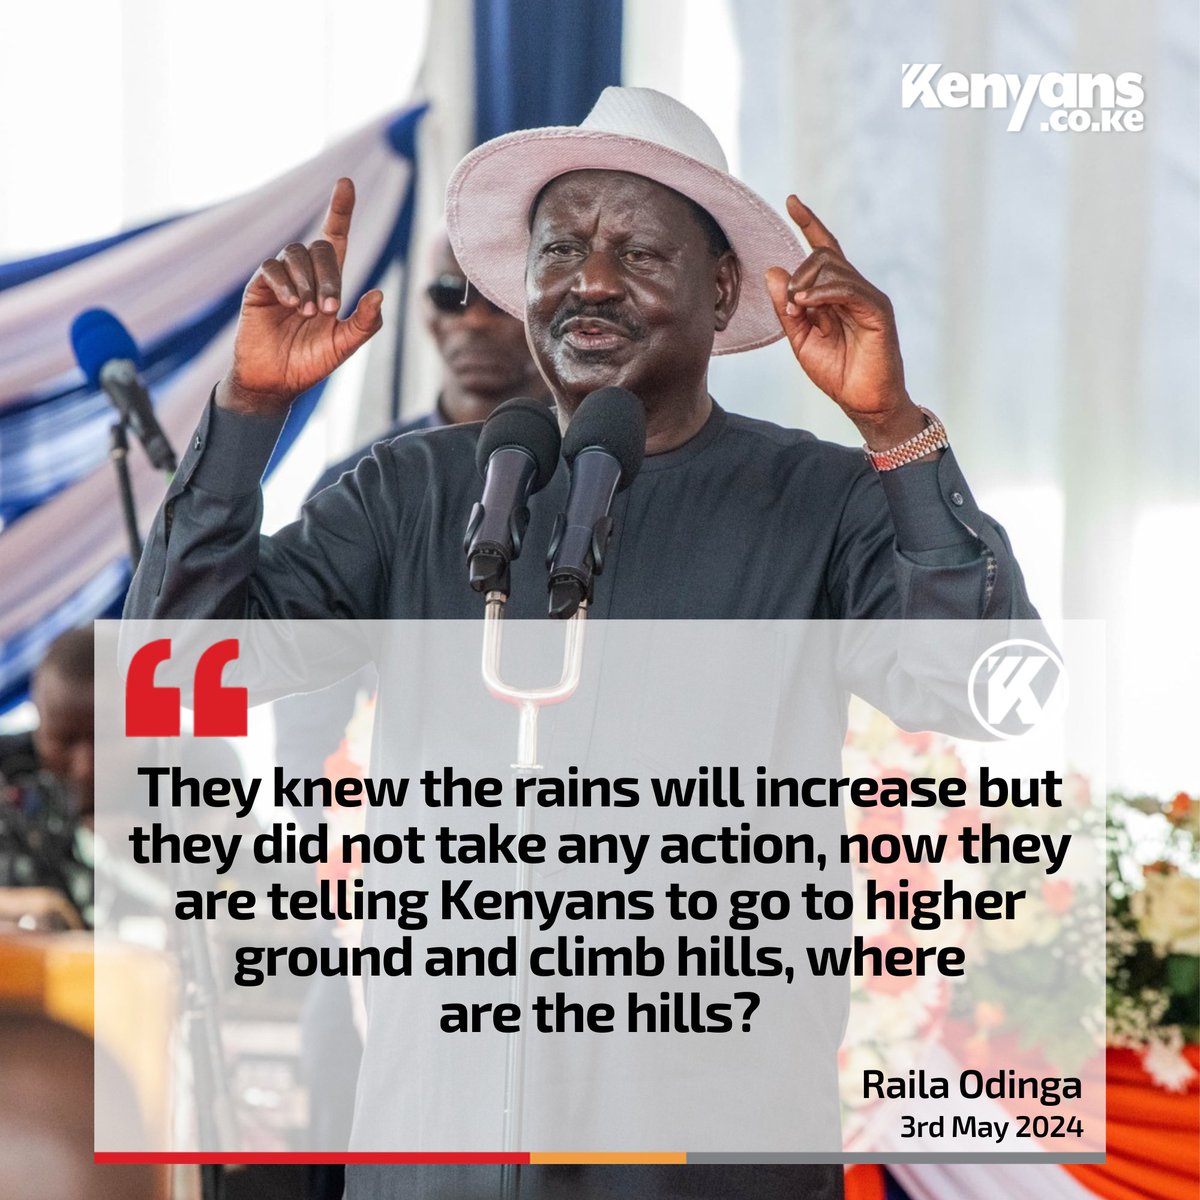 They are now telling Kenyans to go to higher ground and climb hills, where are the hills? - Raila Odinga